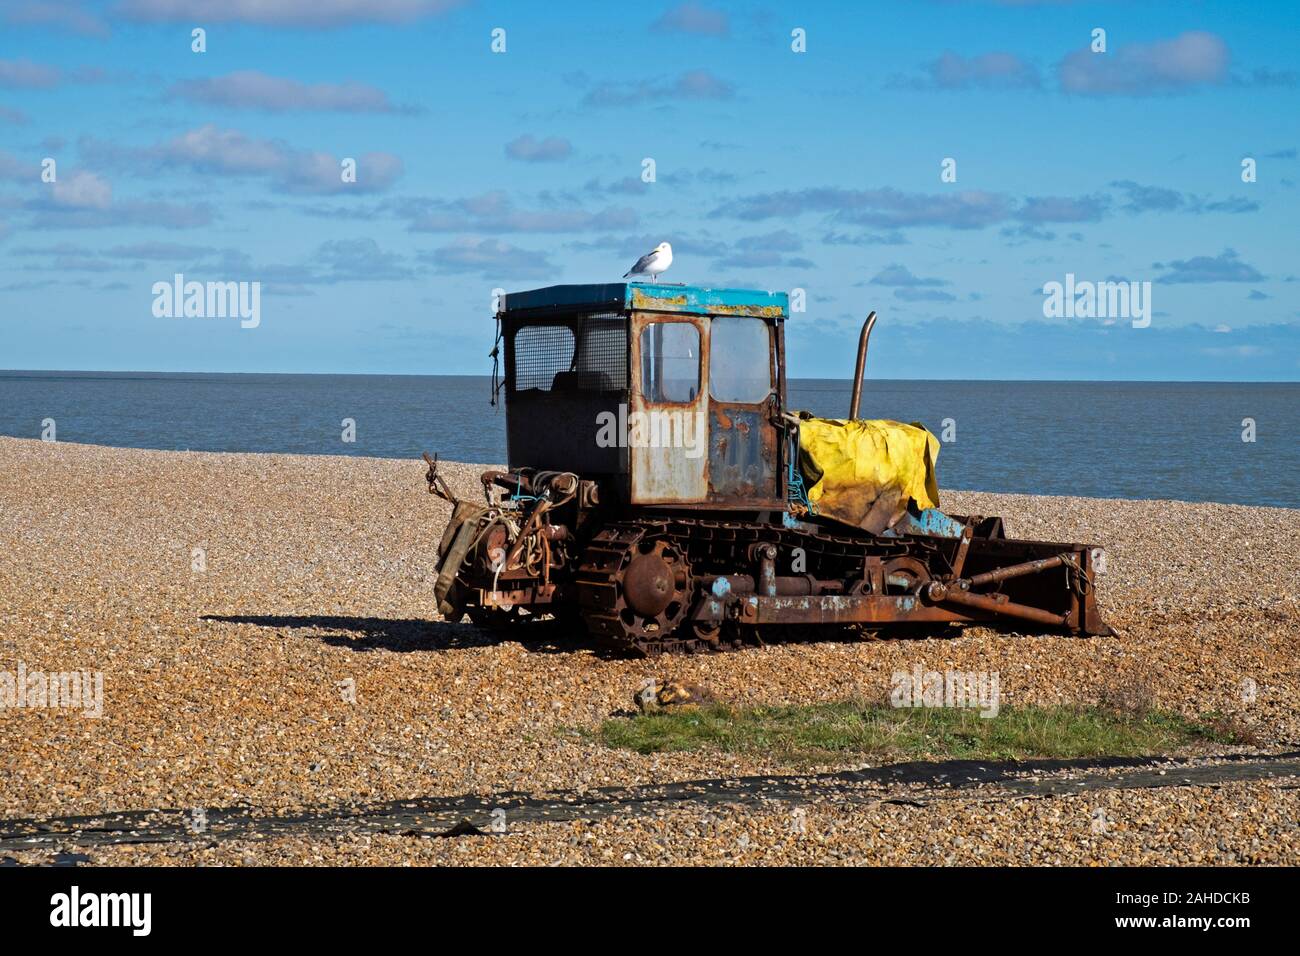 Caterpillar used in the fishing industry Aldeburgh Suffolk UK Stock Photo